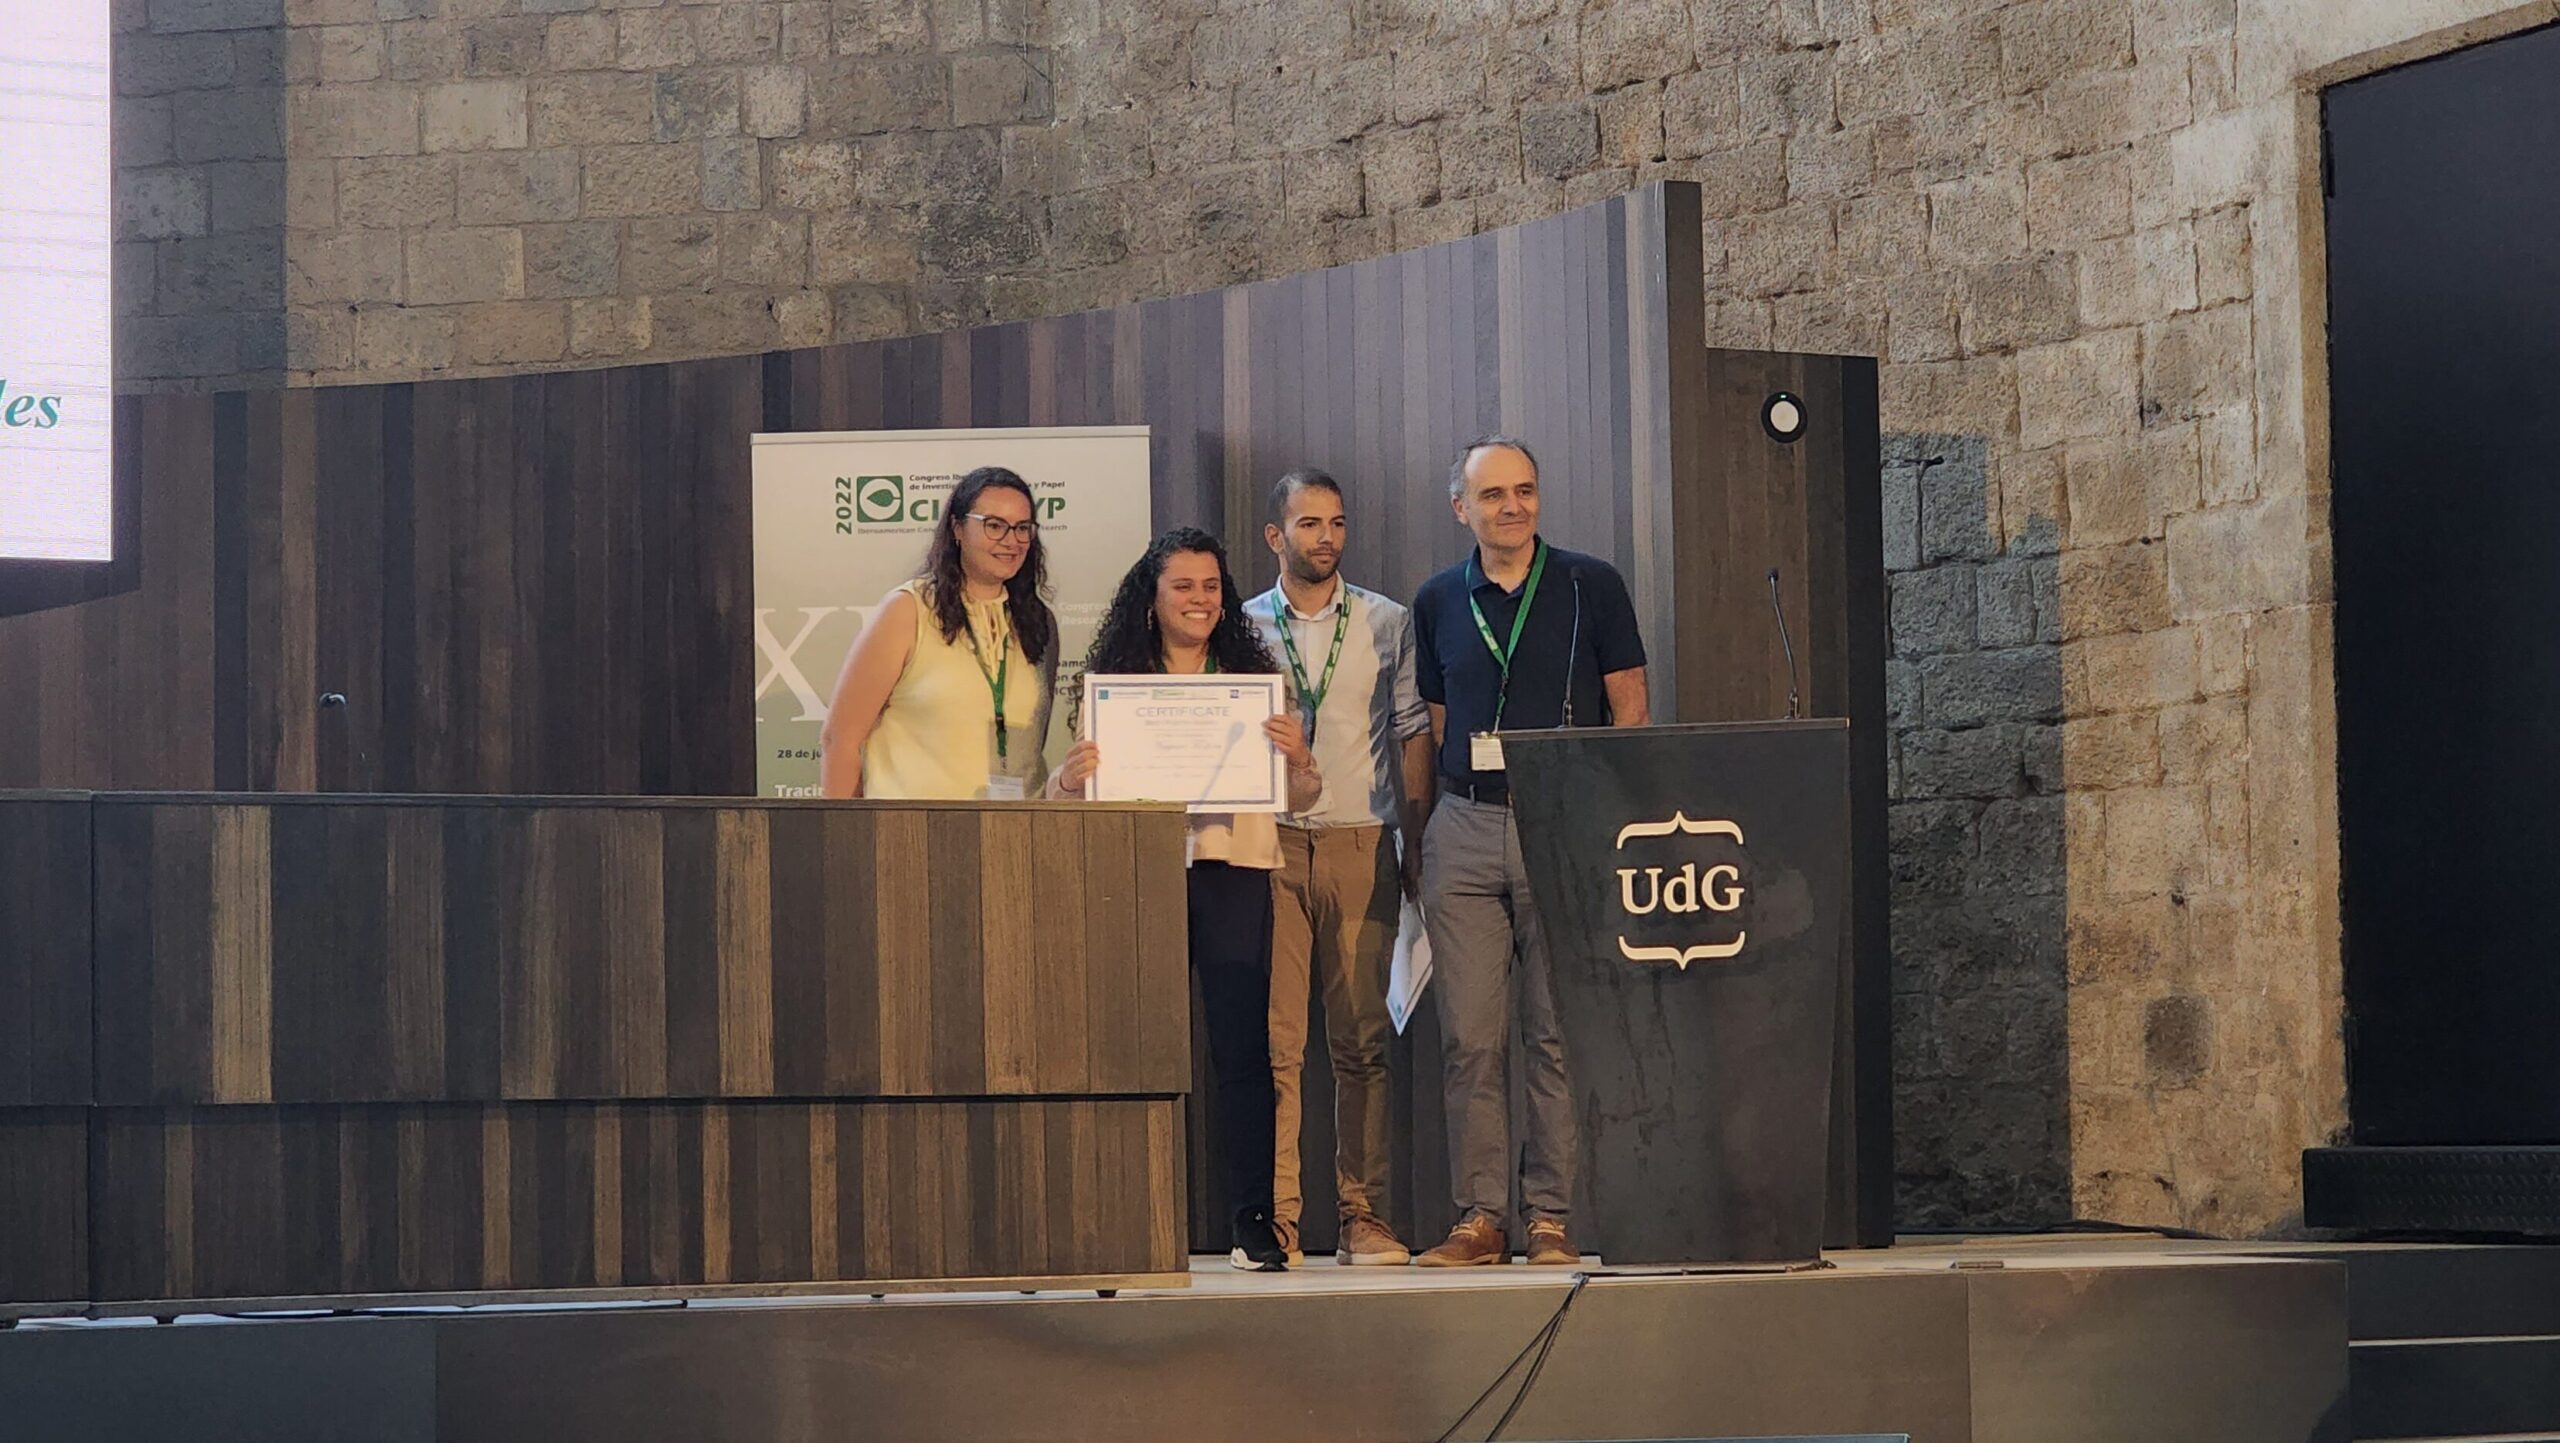 Naycari Forfora is recognized on stage - Naycari Forbore Attends Iberoamerican Cellulose Conference in Spain - Forest Biomaterials NC State University